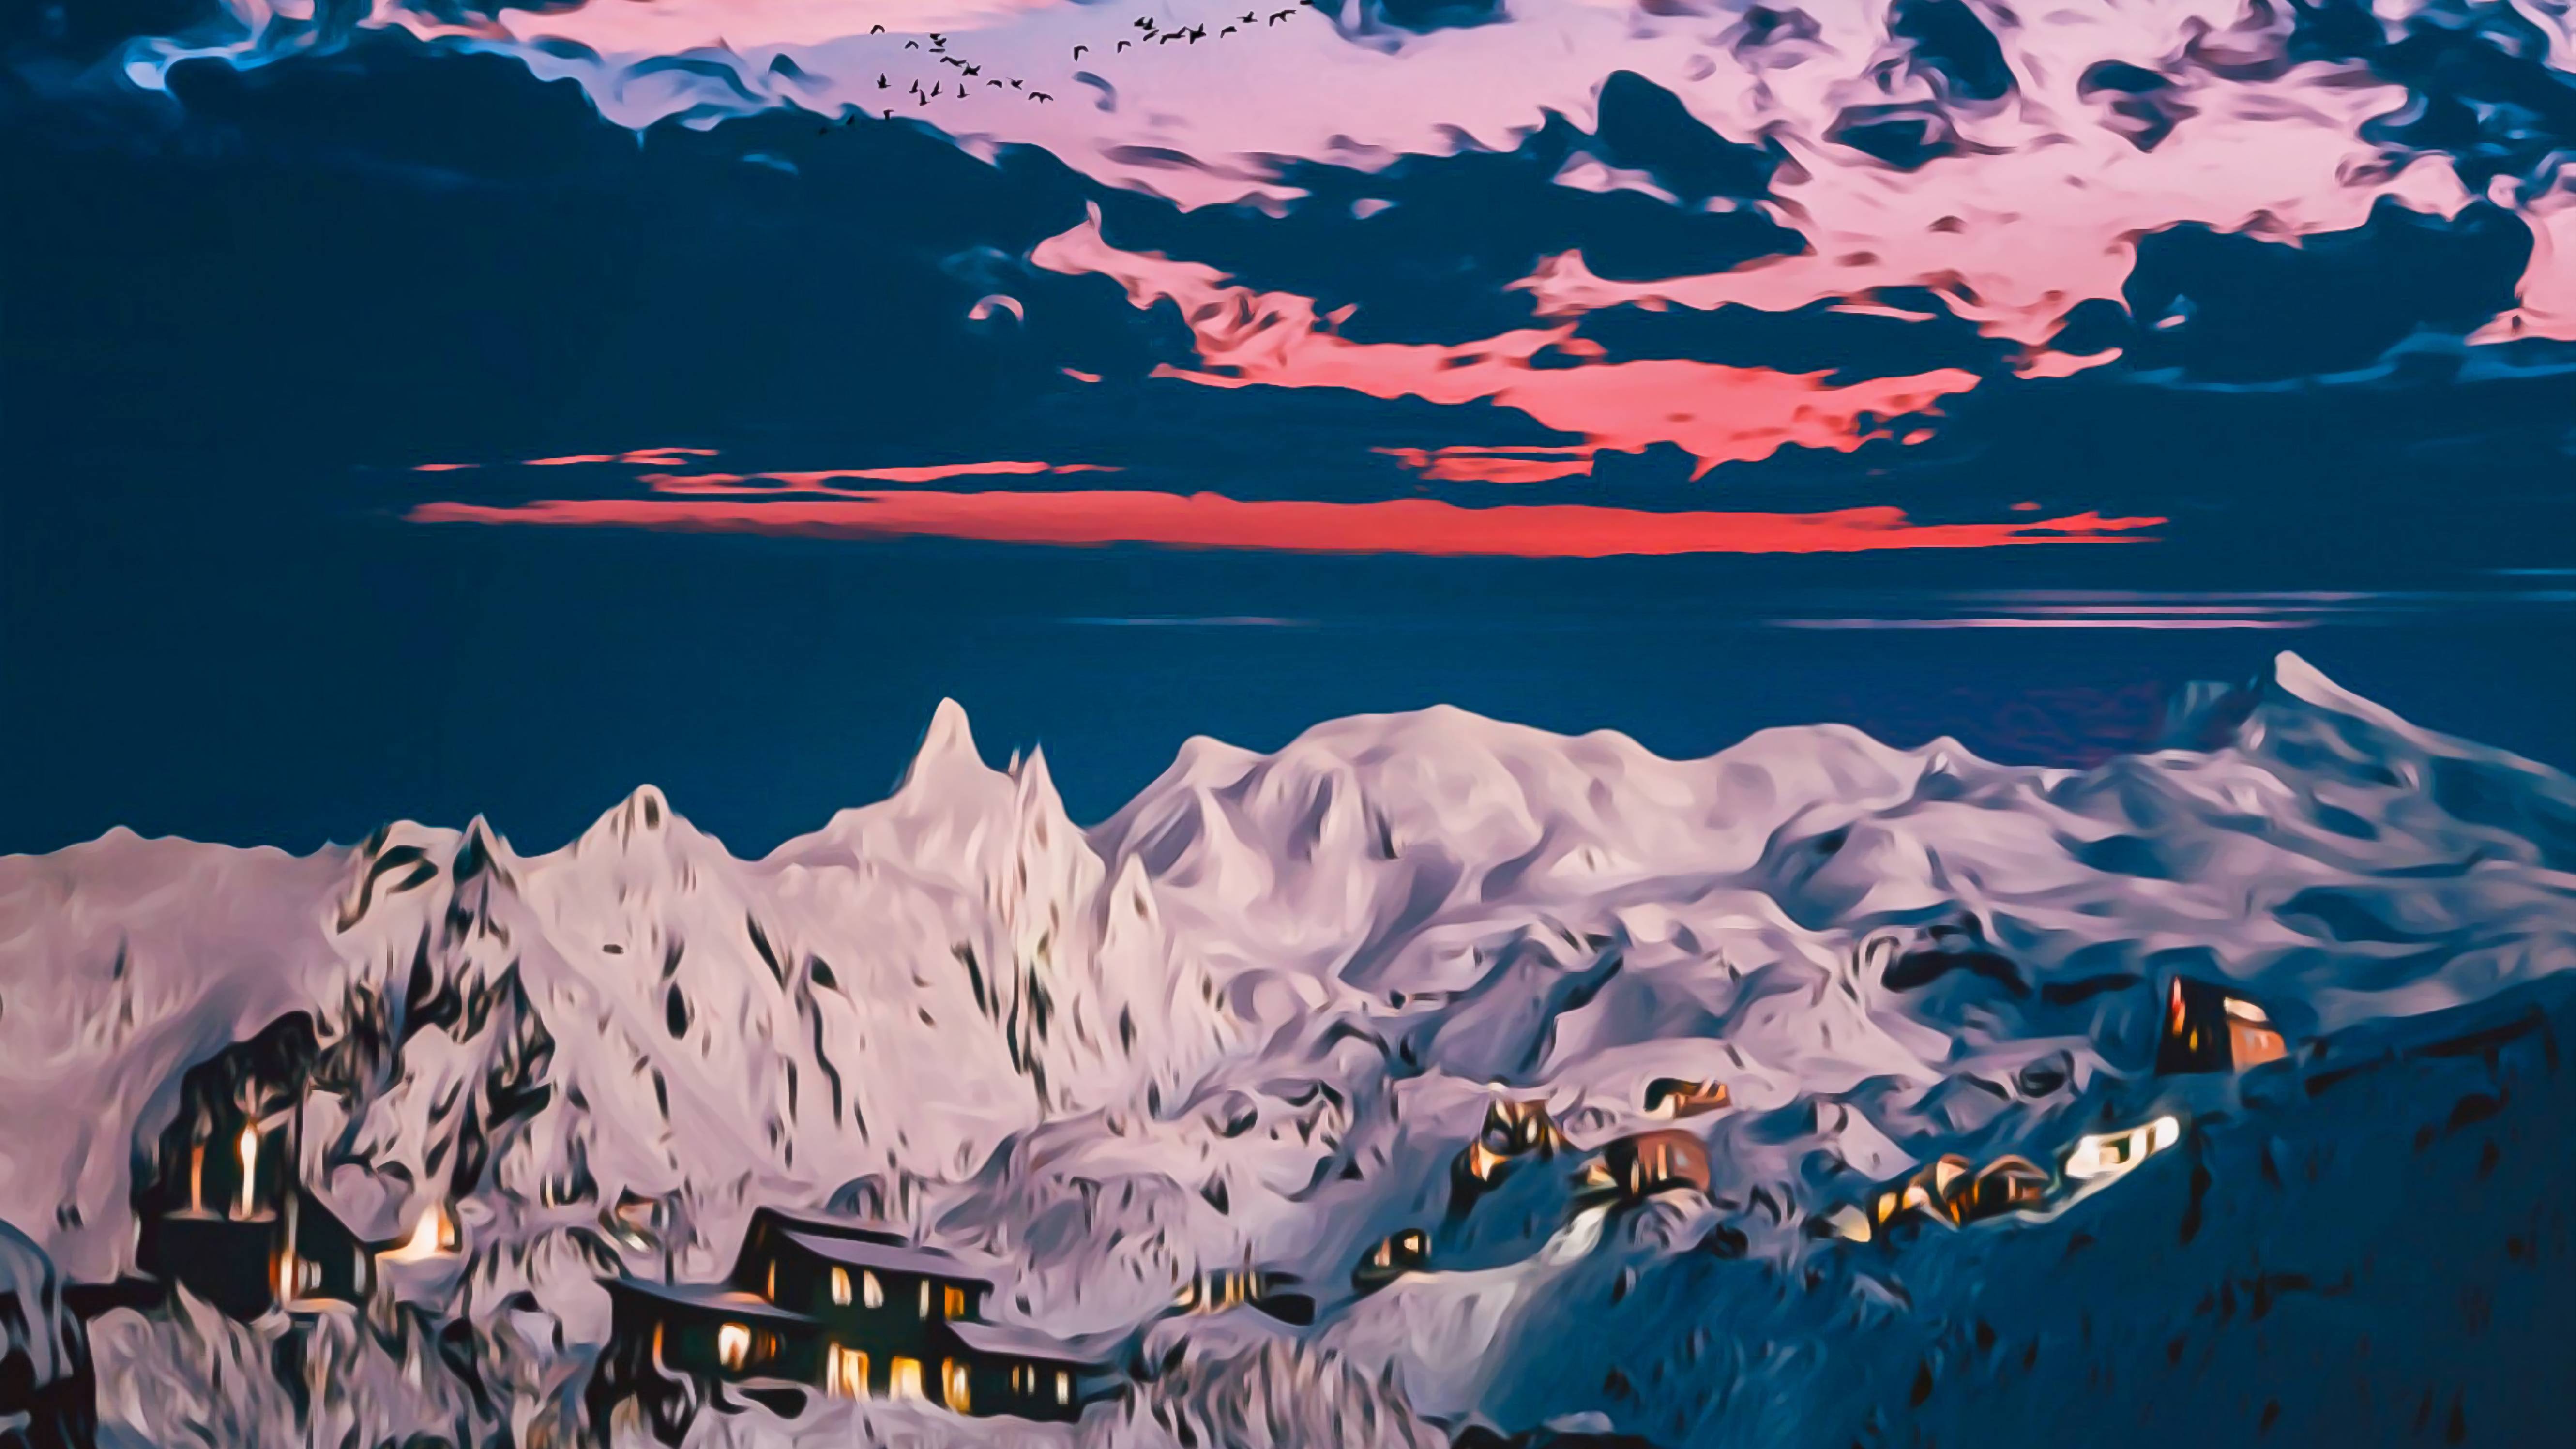 A painting of snowy mountains with houses on them - Mountain